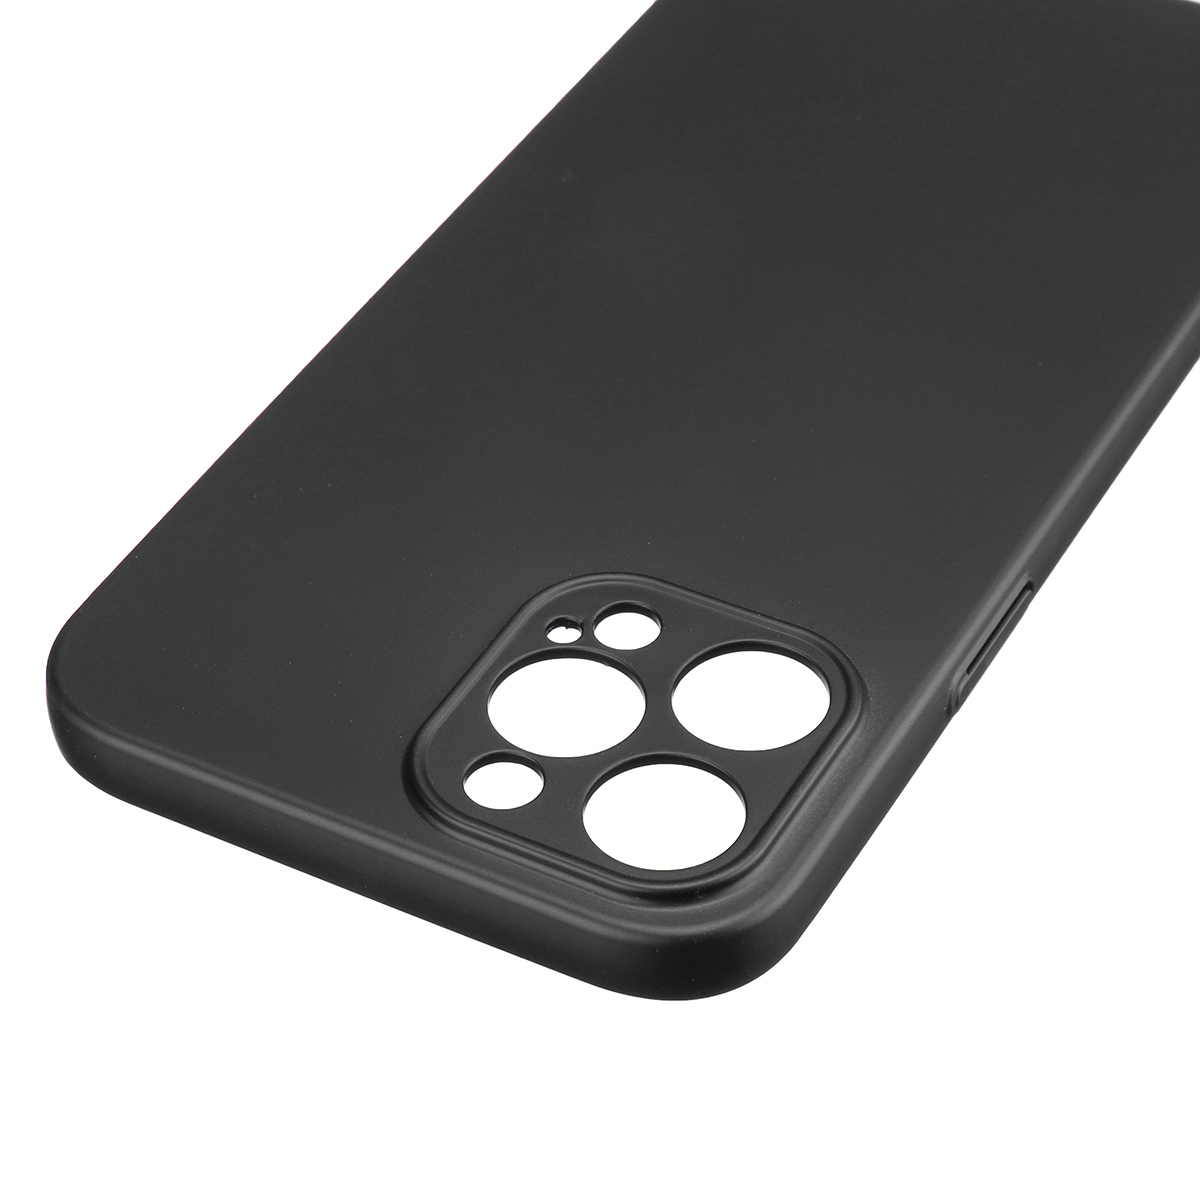 Bakeey-for-iPhone-12-Pro-Max-Case-Silky-Smooth-Micro-Matte-Anti-Fingerprint-Ultra-Thin-with-Lens-Pro-1788885-7